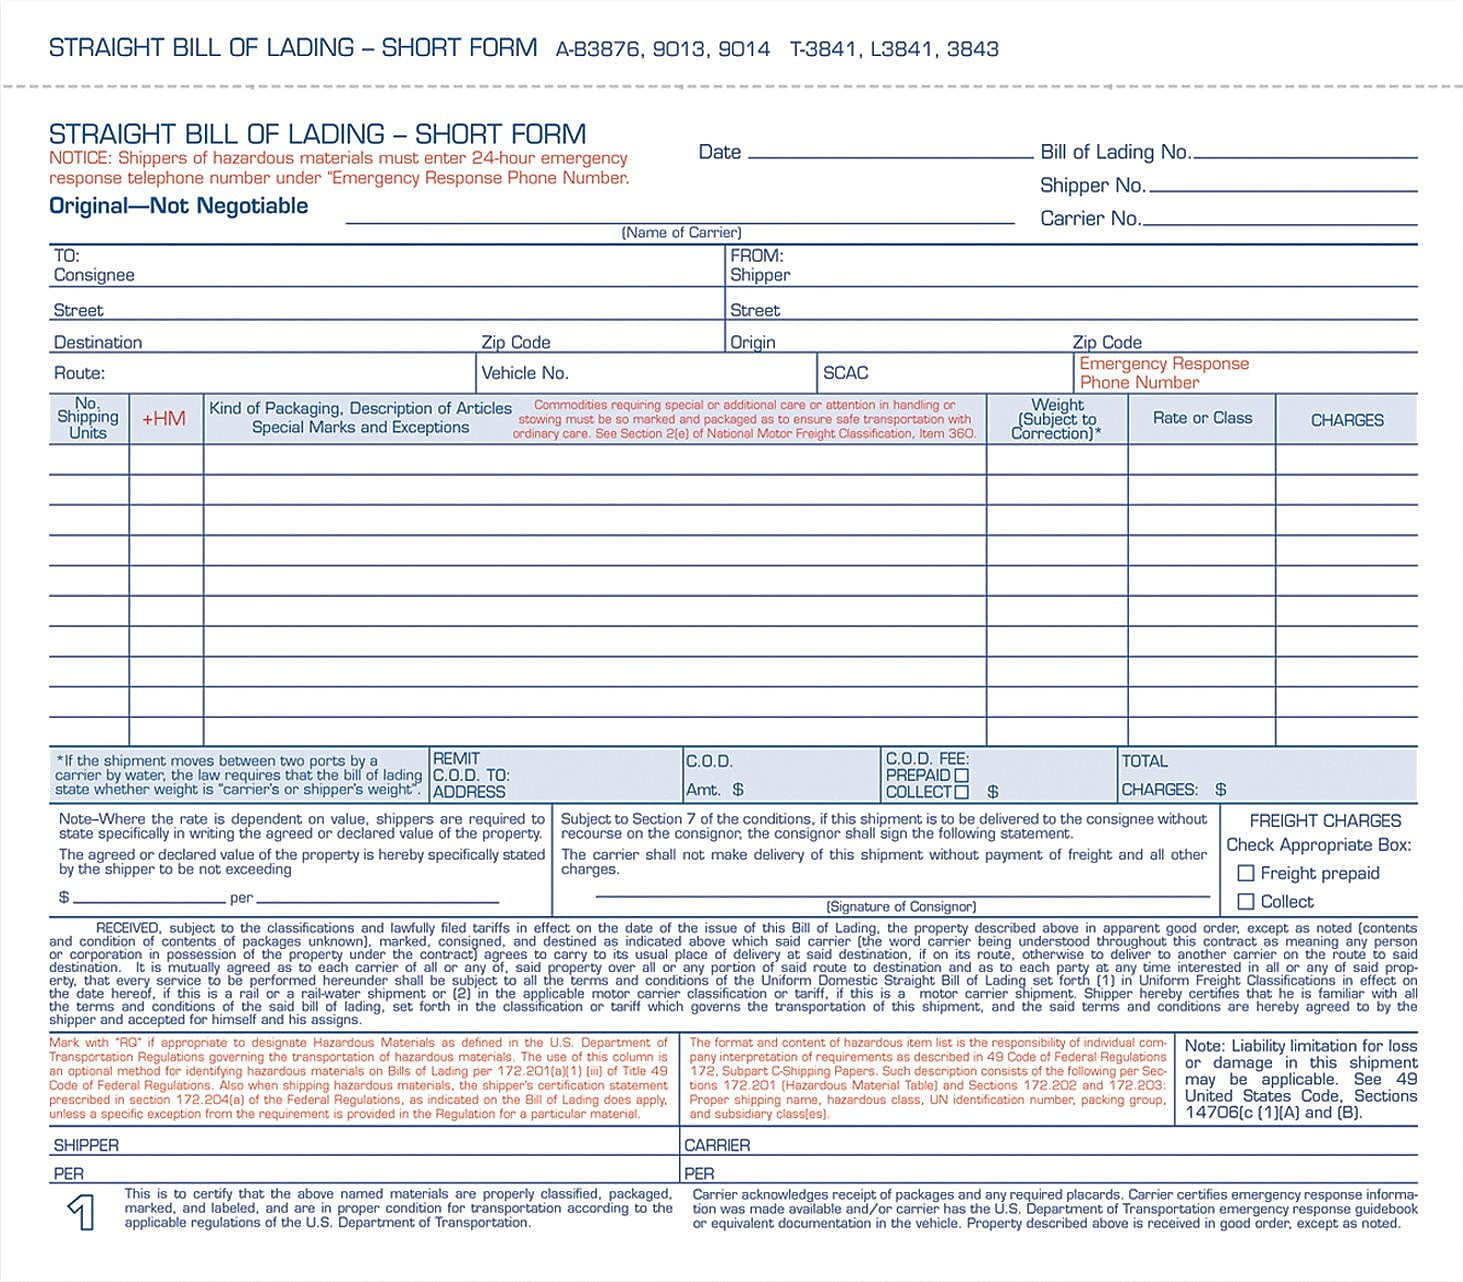 Adams Carbonless Bill Of Lading Forms 8 1 2 X 9013 Walmart Com Walmart Com Ups straight bill of lading